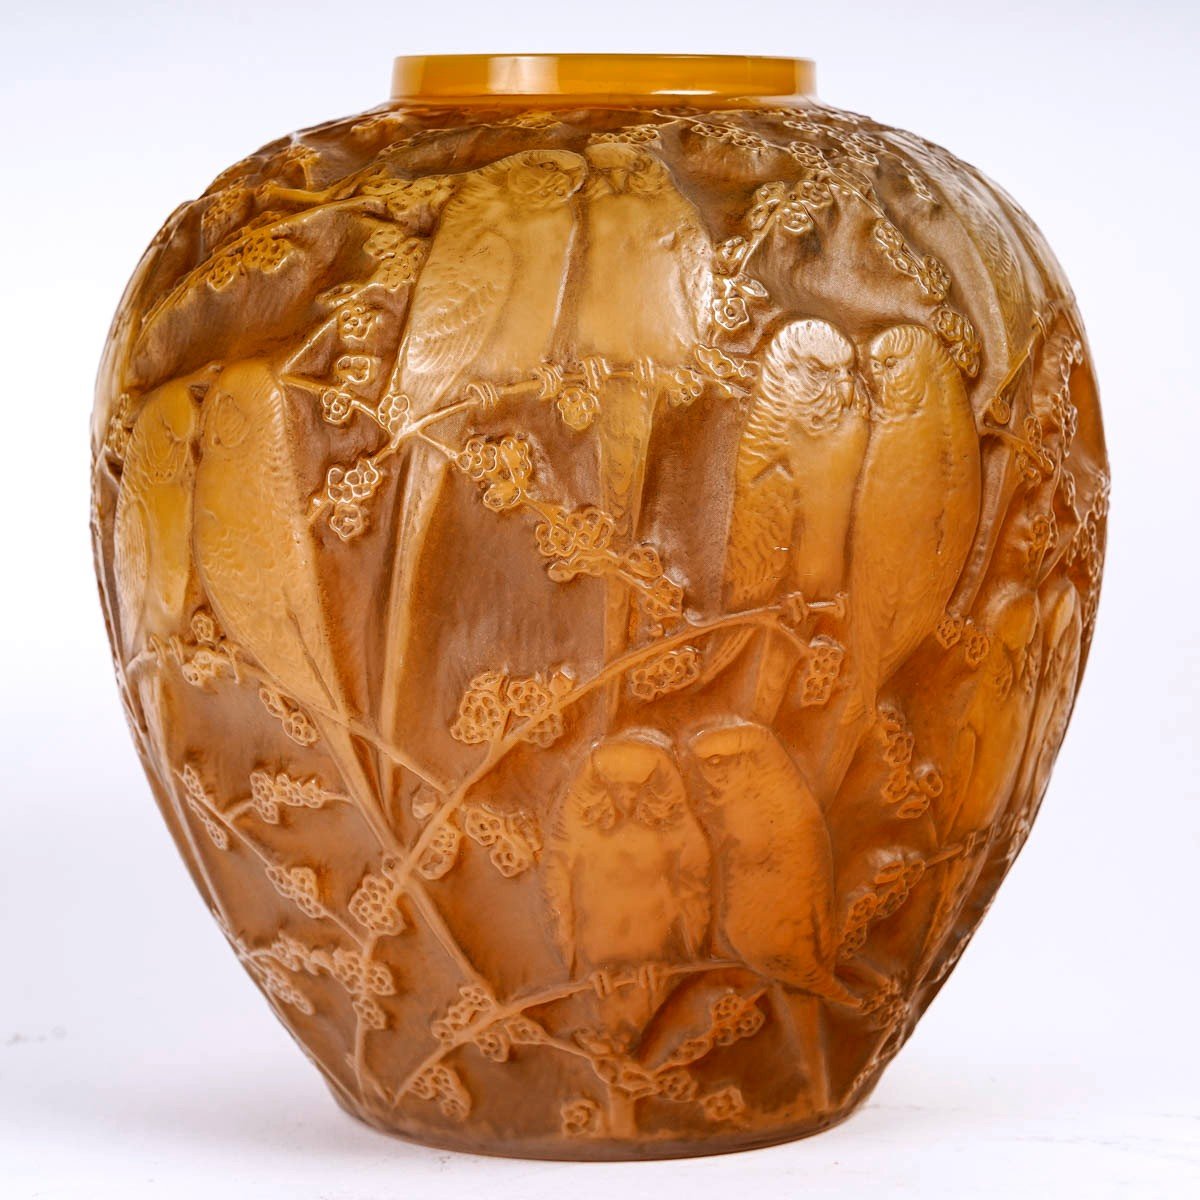 1919 Rene Lalique - Vase Perruches Parrots Cased Butterscotch Glass With Sepia Patina-photo-2